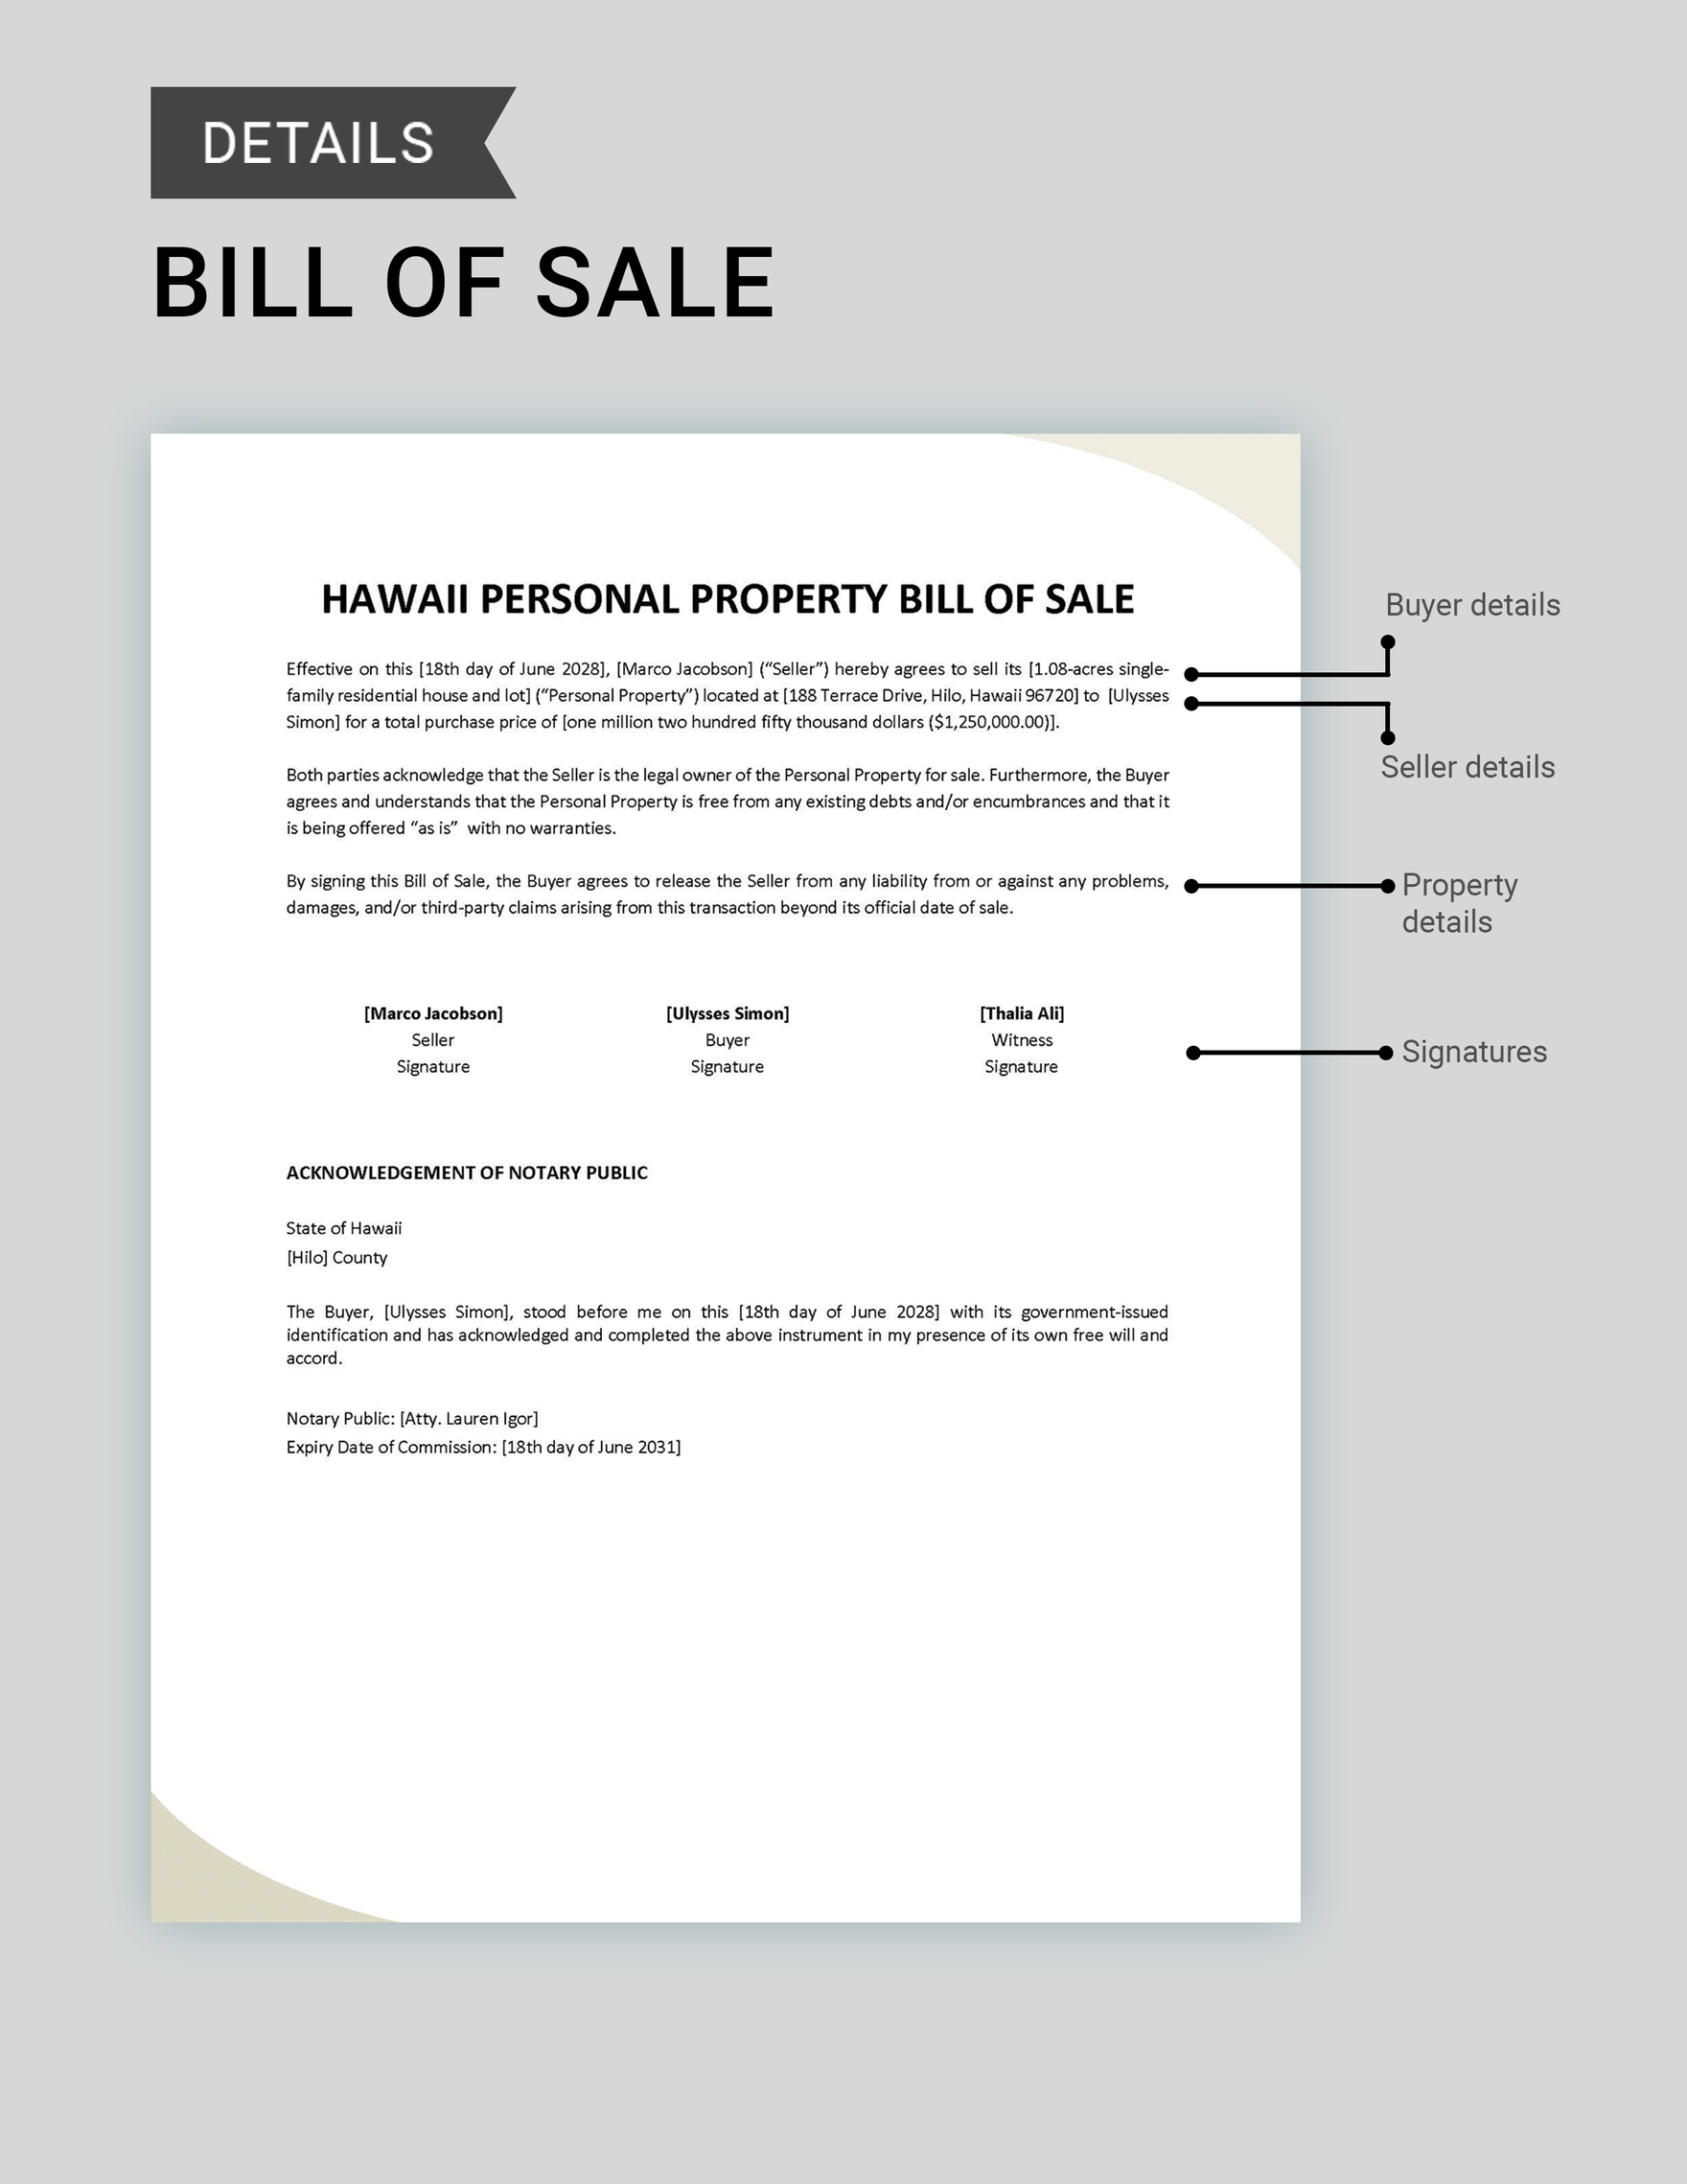 Hawaii Personal Property Bill of Sale Template